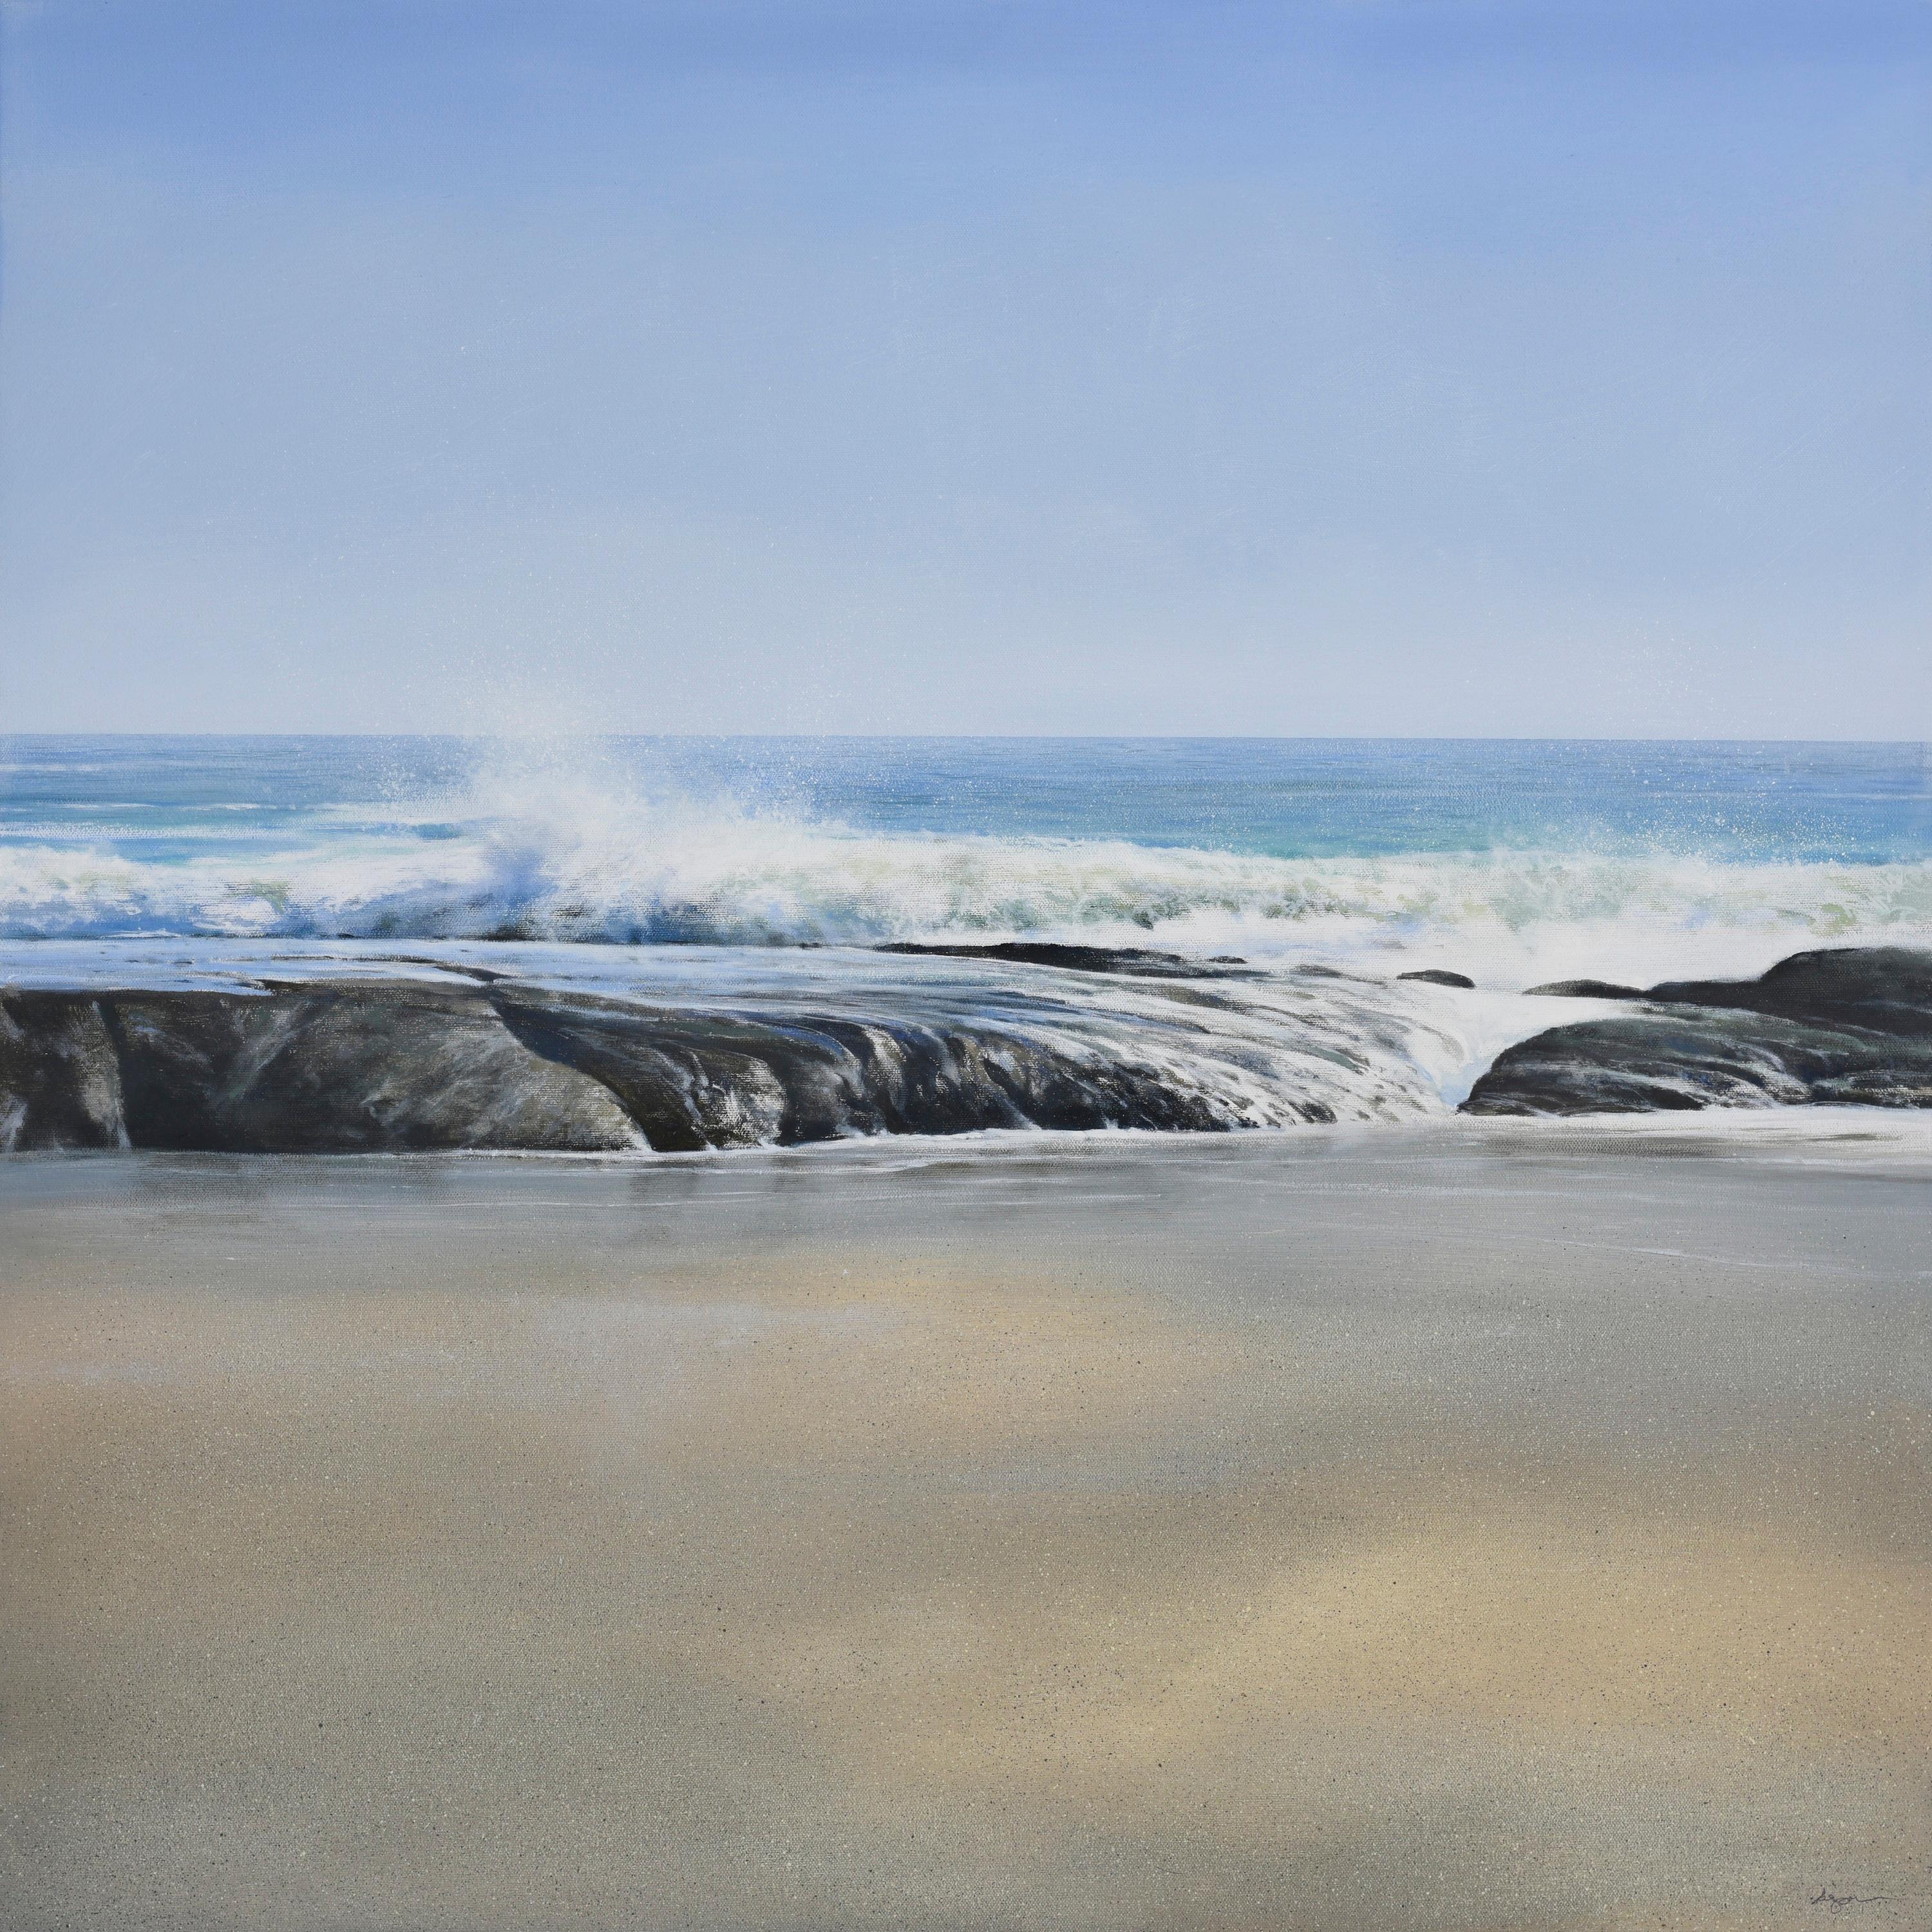 30 x 30 inches   Giclee print on canvas from an original oil painting.
 (Edition 1 of 500) 

Todd Kenyon conjures the carefree exuberance of a perfect day spent on a deserted beach. Kenyon's unfettered paintings balance air, water, earth with